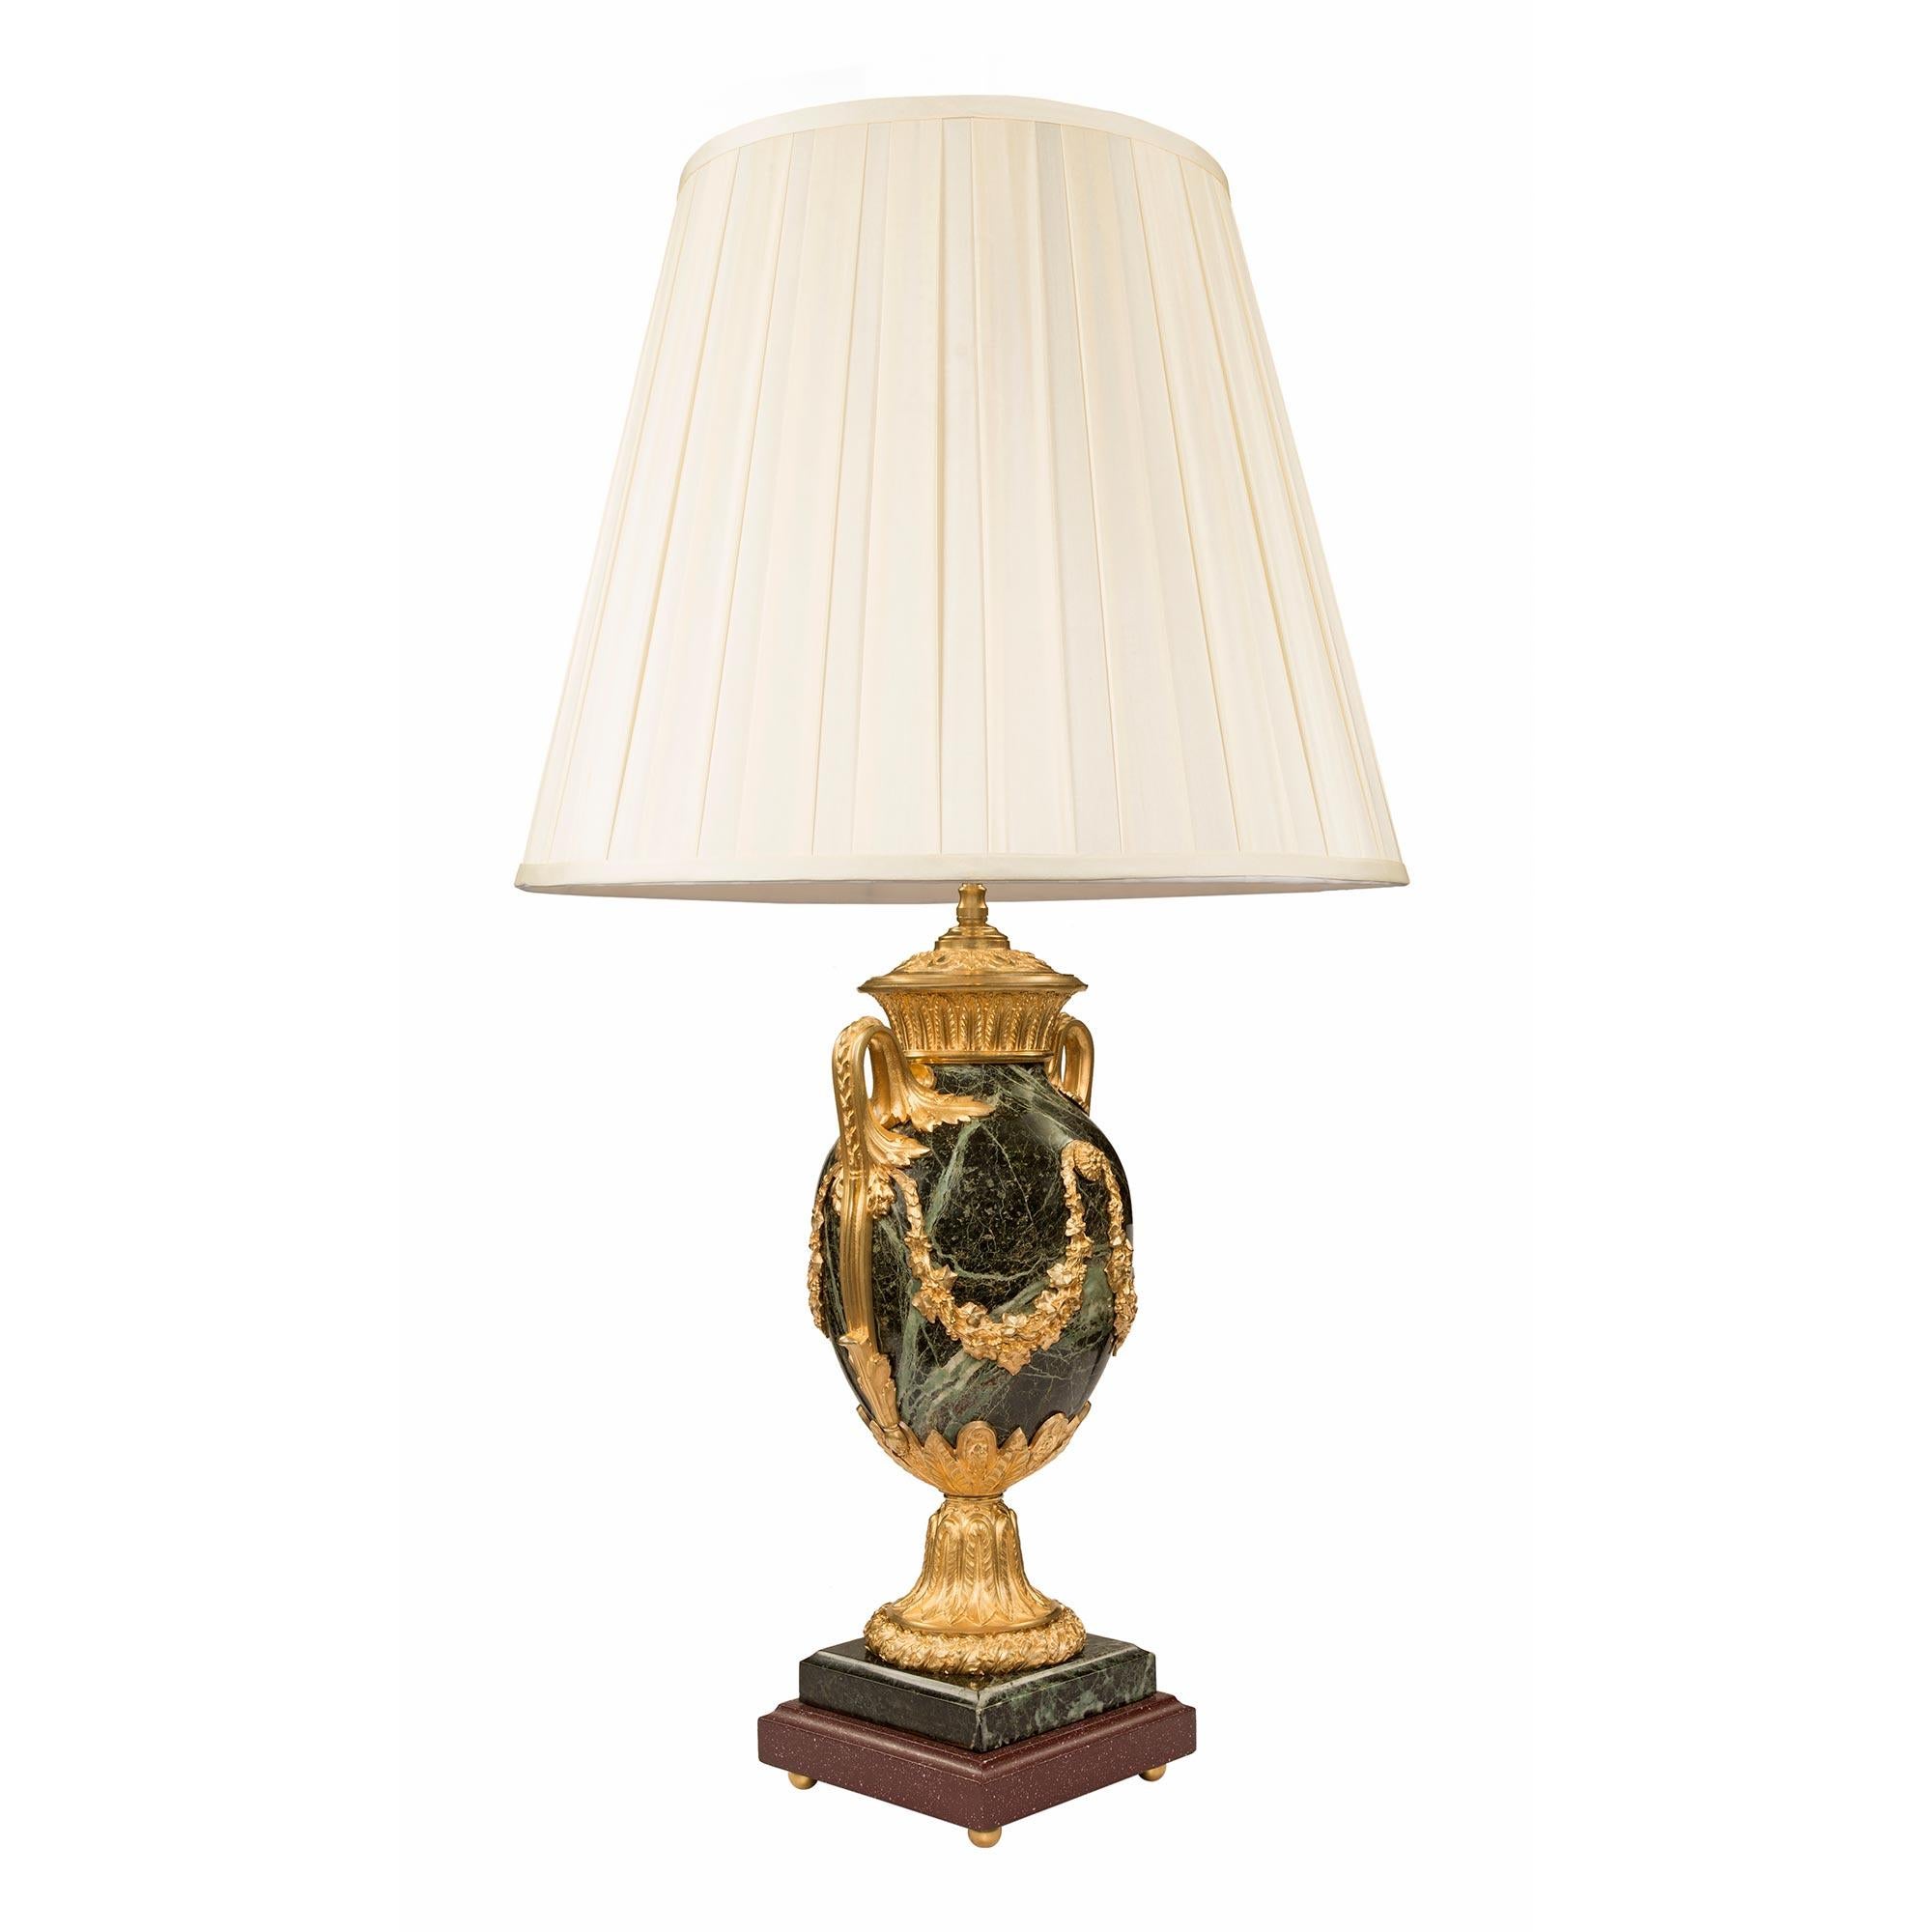 A very high quality French mid 19th century Louis XVI st. single lamp in ormolu, marble and faux porphyry. The lamp is raised by a square mottled edged faux porphyry base with ormolu ball feet. Above is the square Vert de Patricia marble plinth a